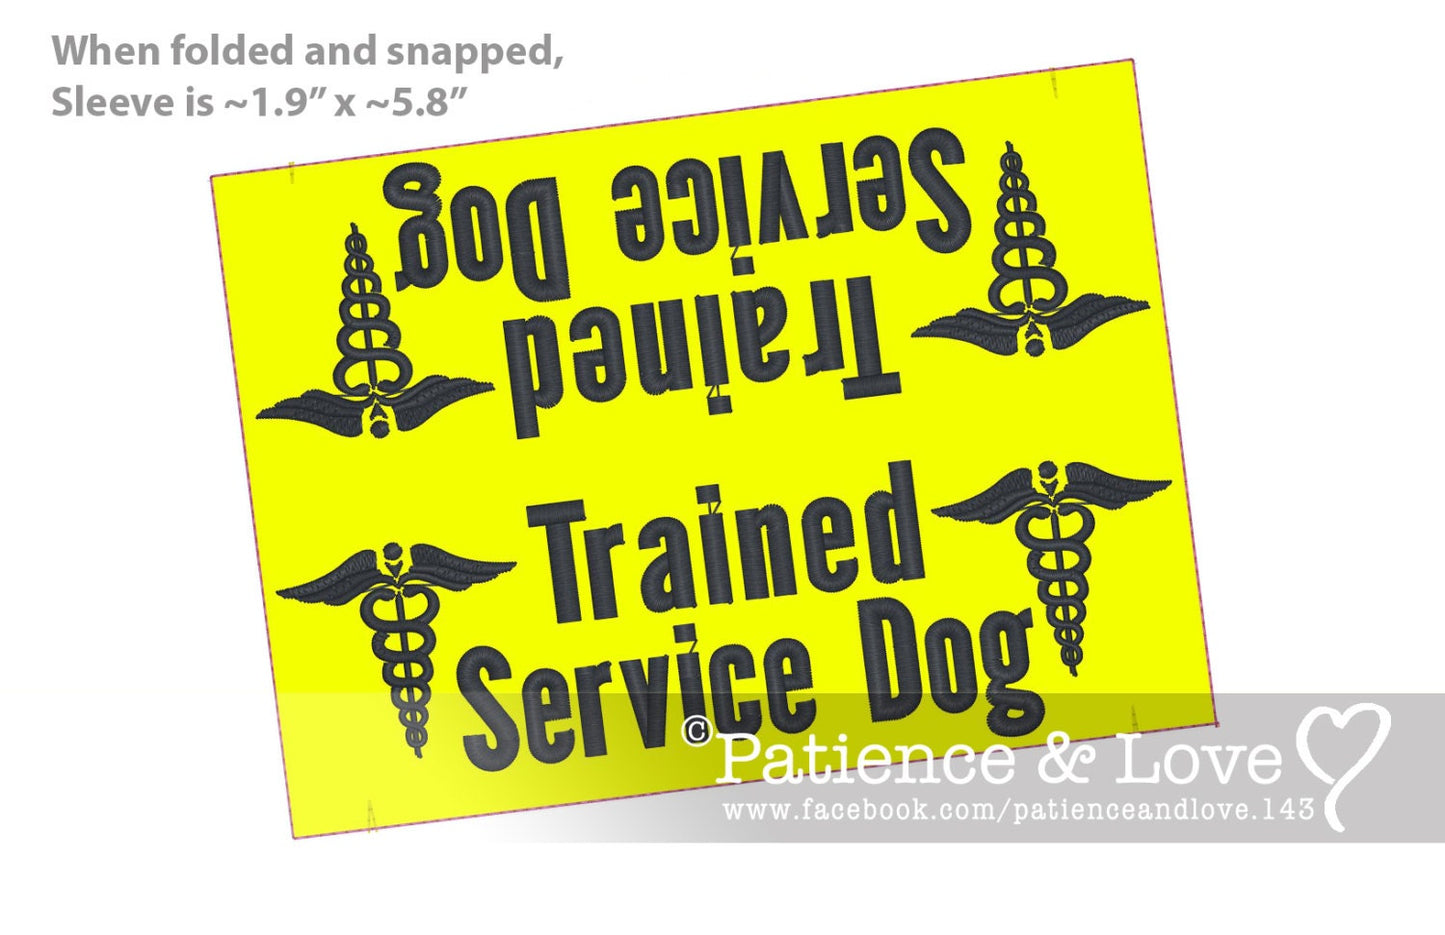 Trained Service Dog with snakes, caduceus, 5.9" long Leash Sleeve